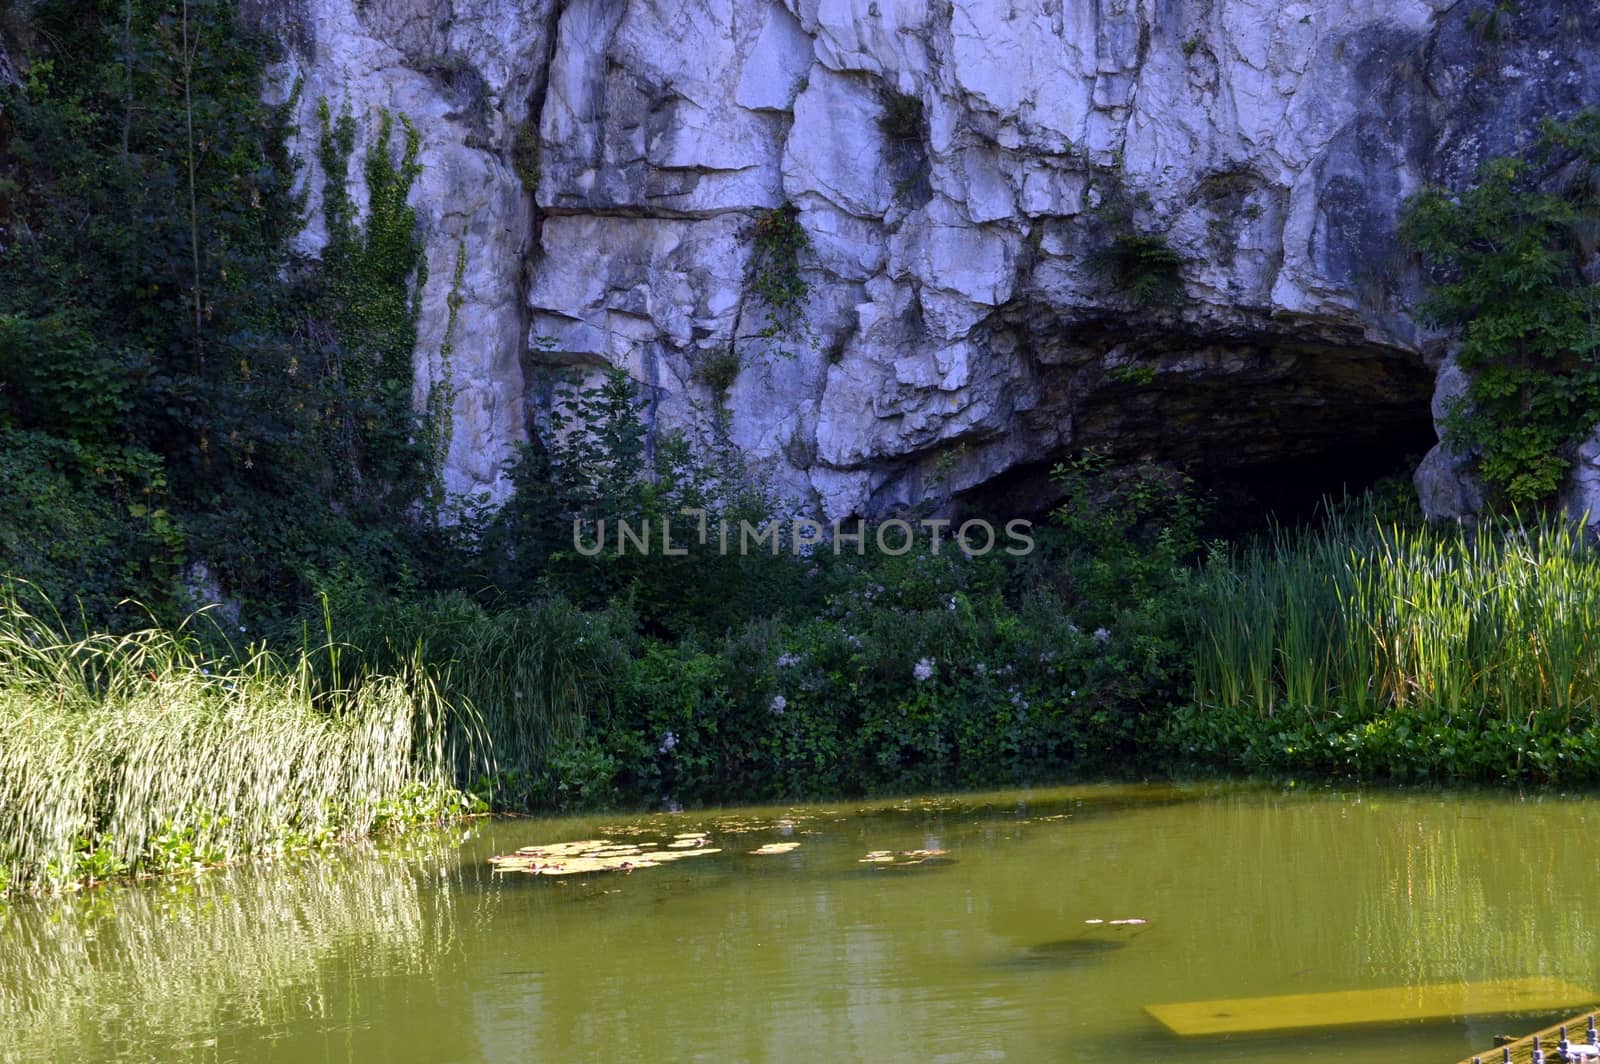 Cave with an ornamental lake containing a shady water, reeds and water lilies.